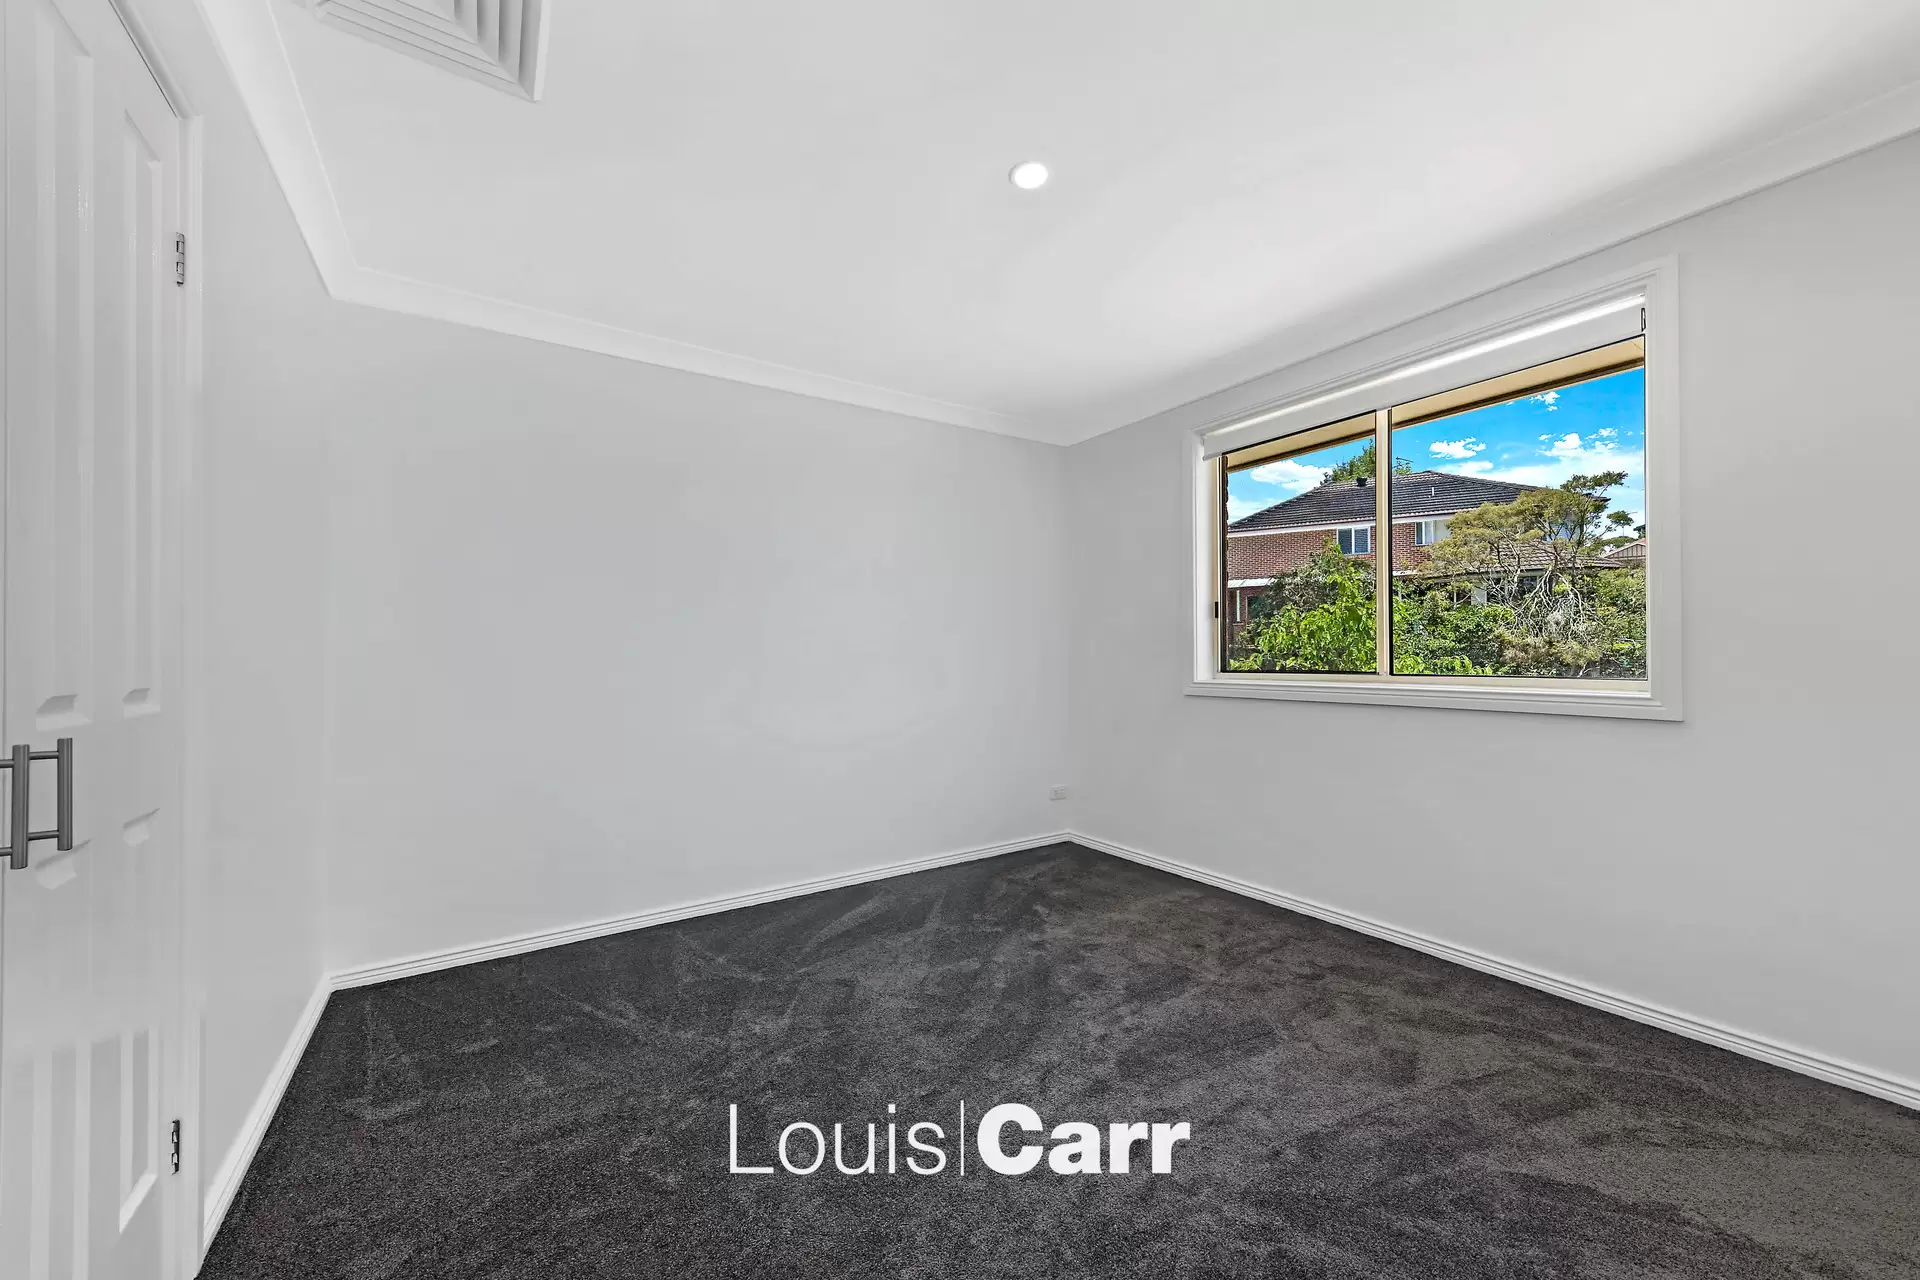 Photo #9: 4 Kingussie Avenue, Castle Hill - Sold by Louis Carr Real Estate